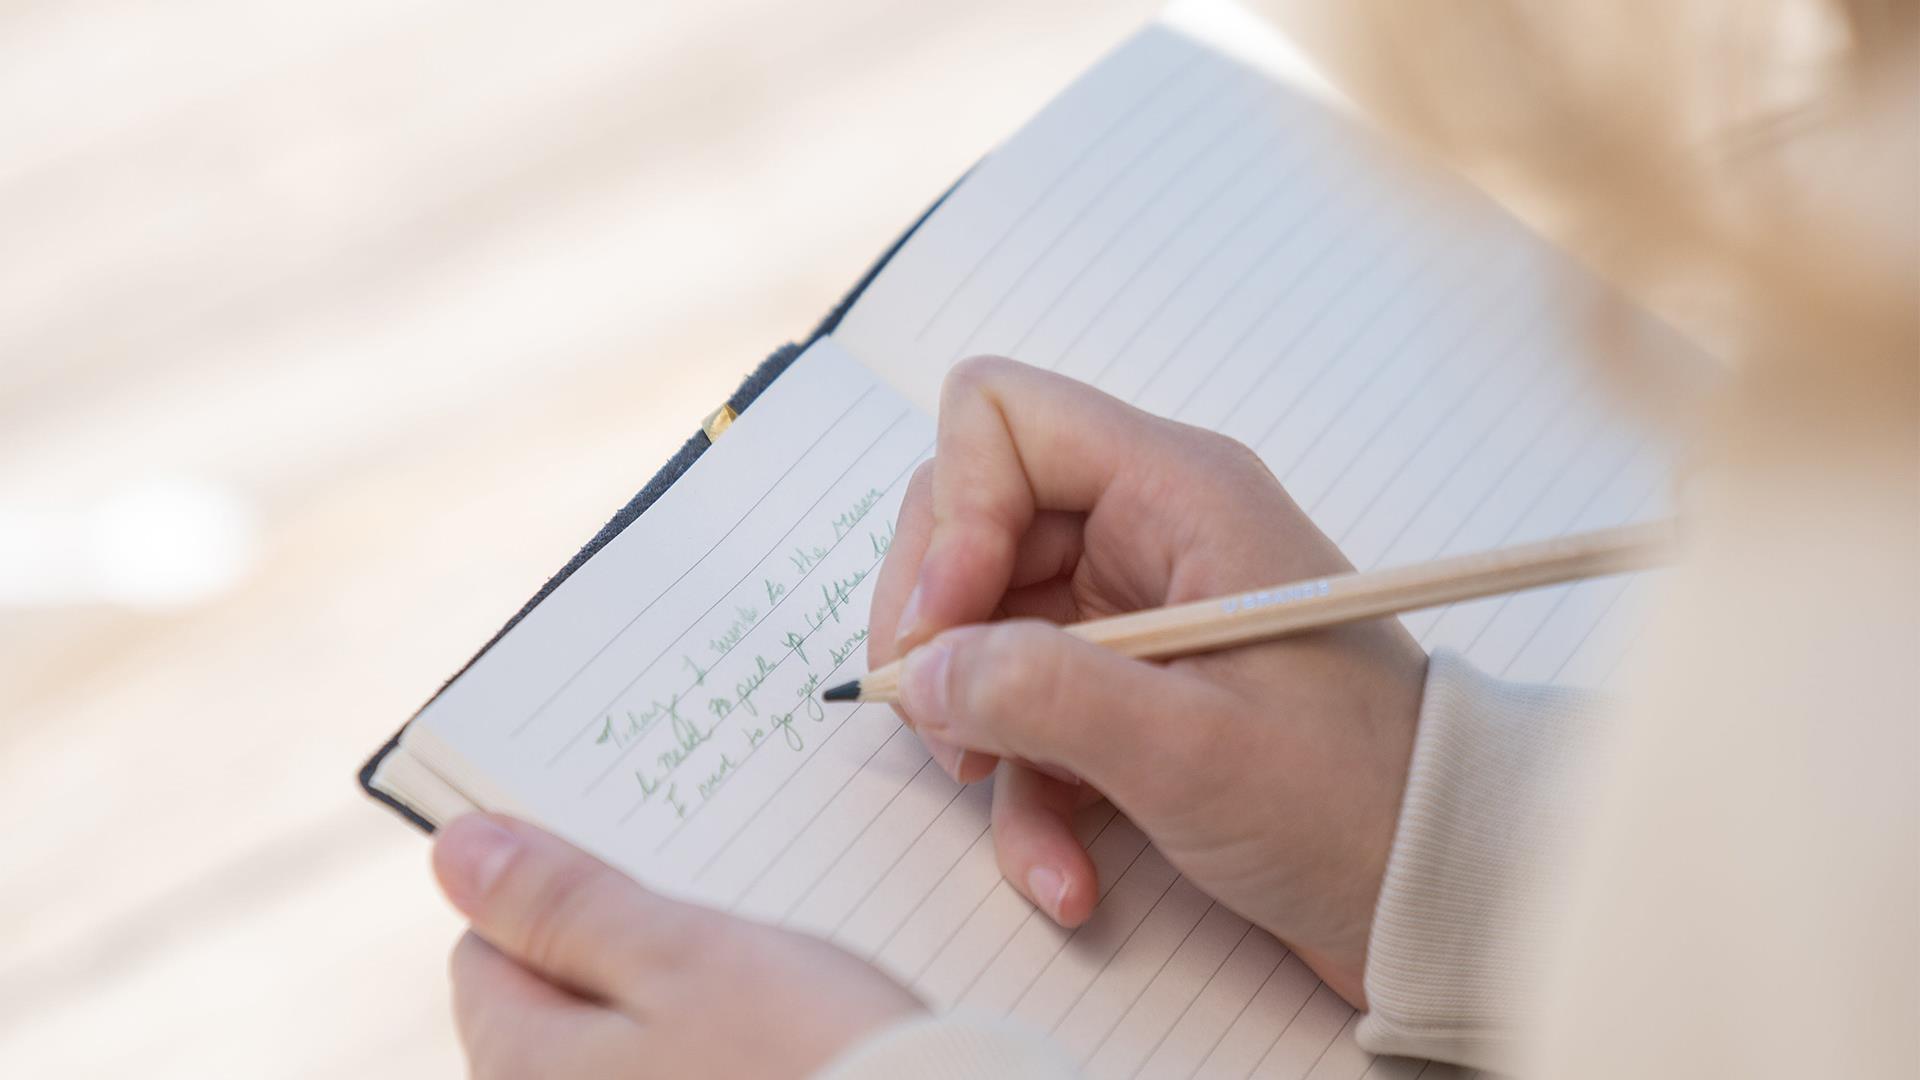 a person's hand writing in a journal with a pencil